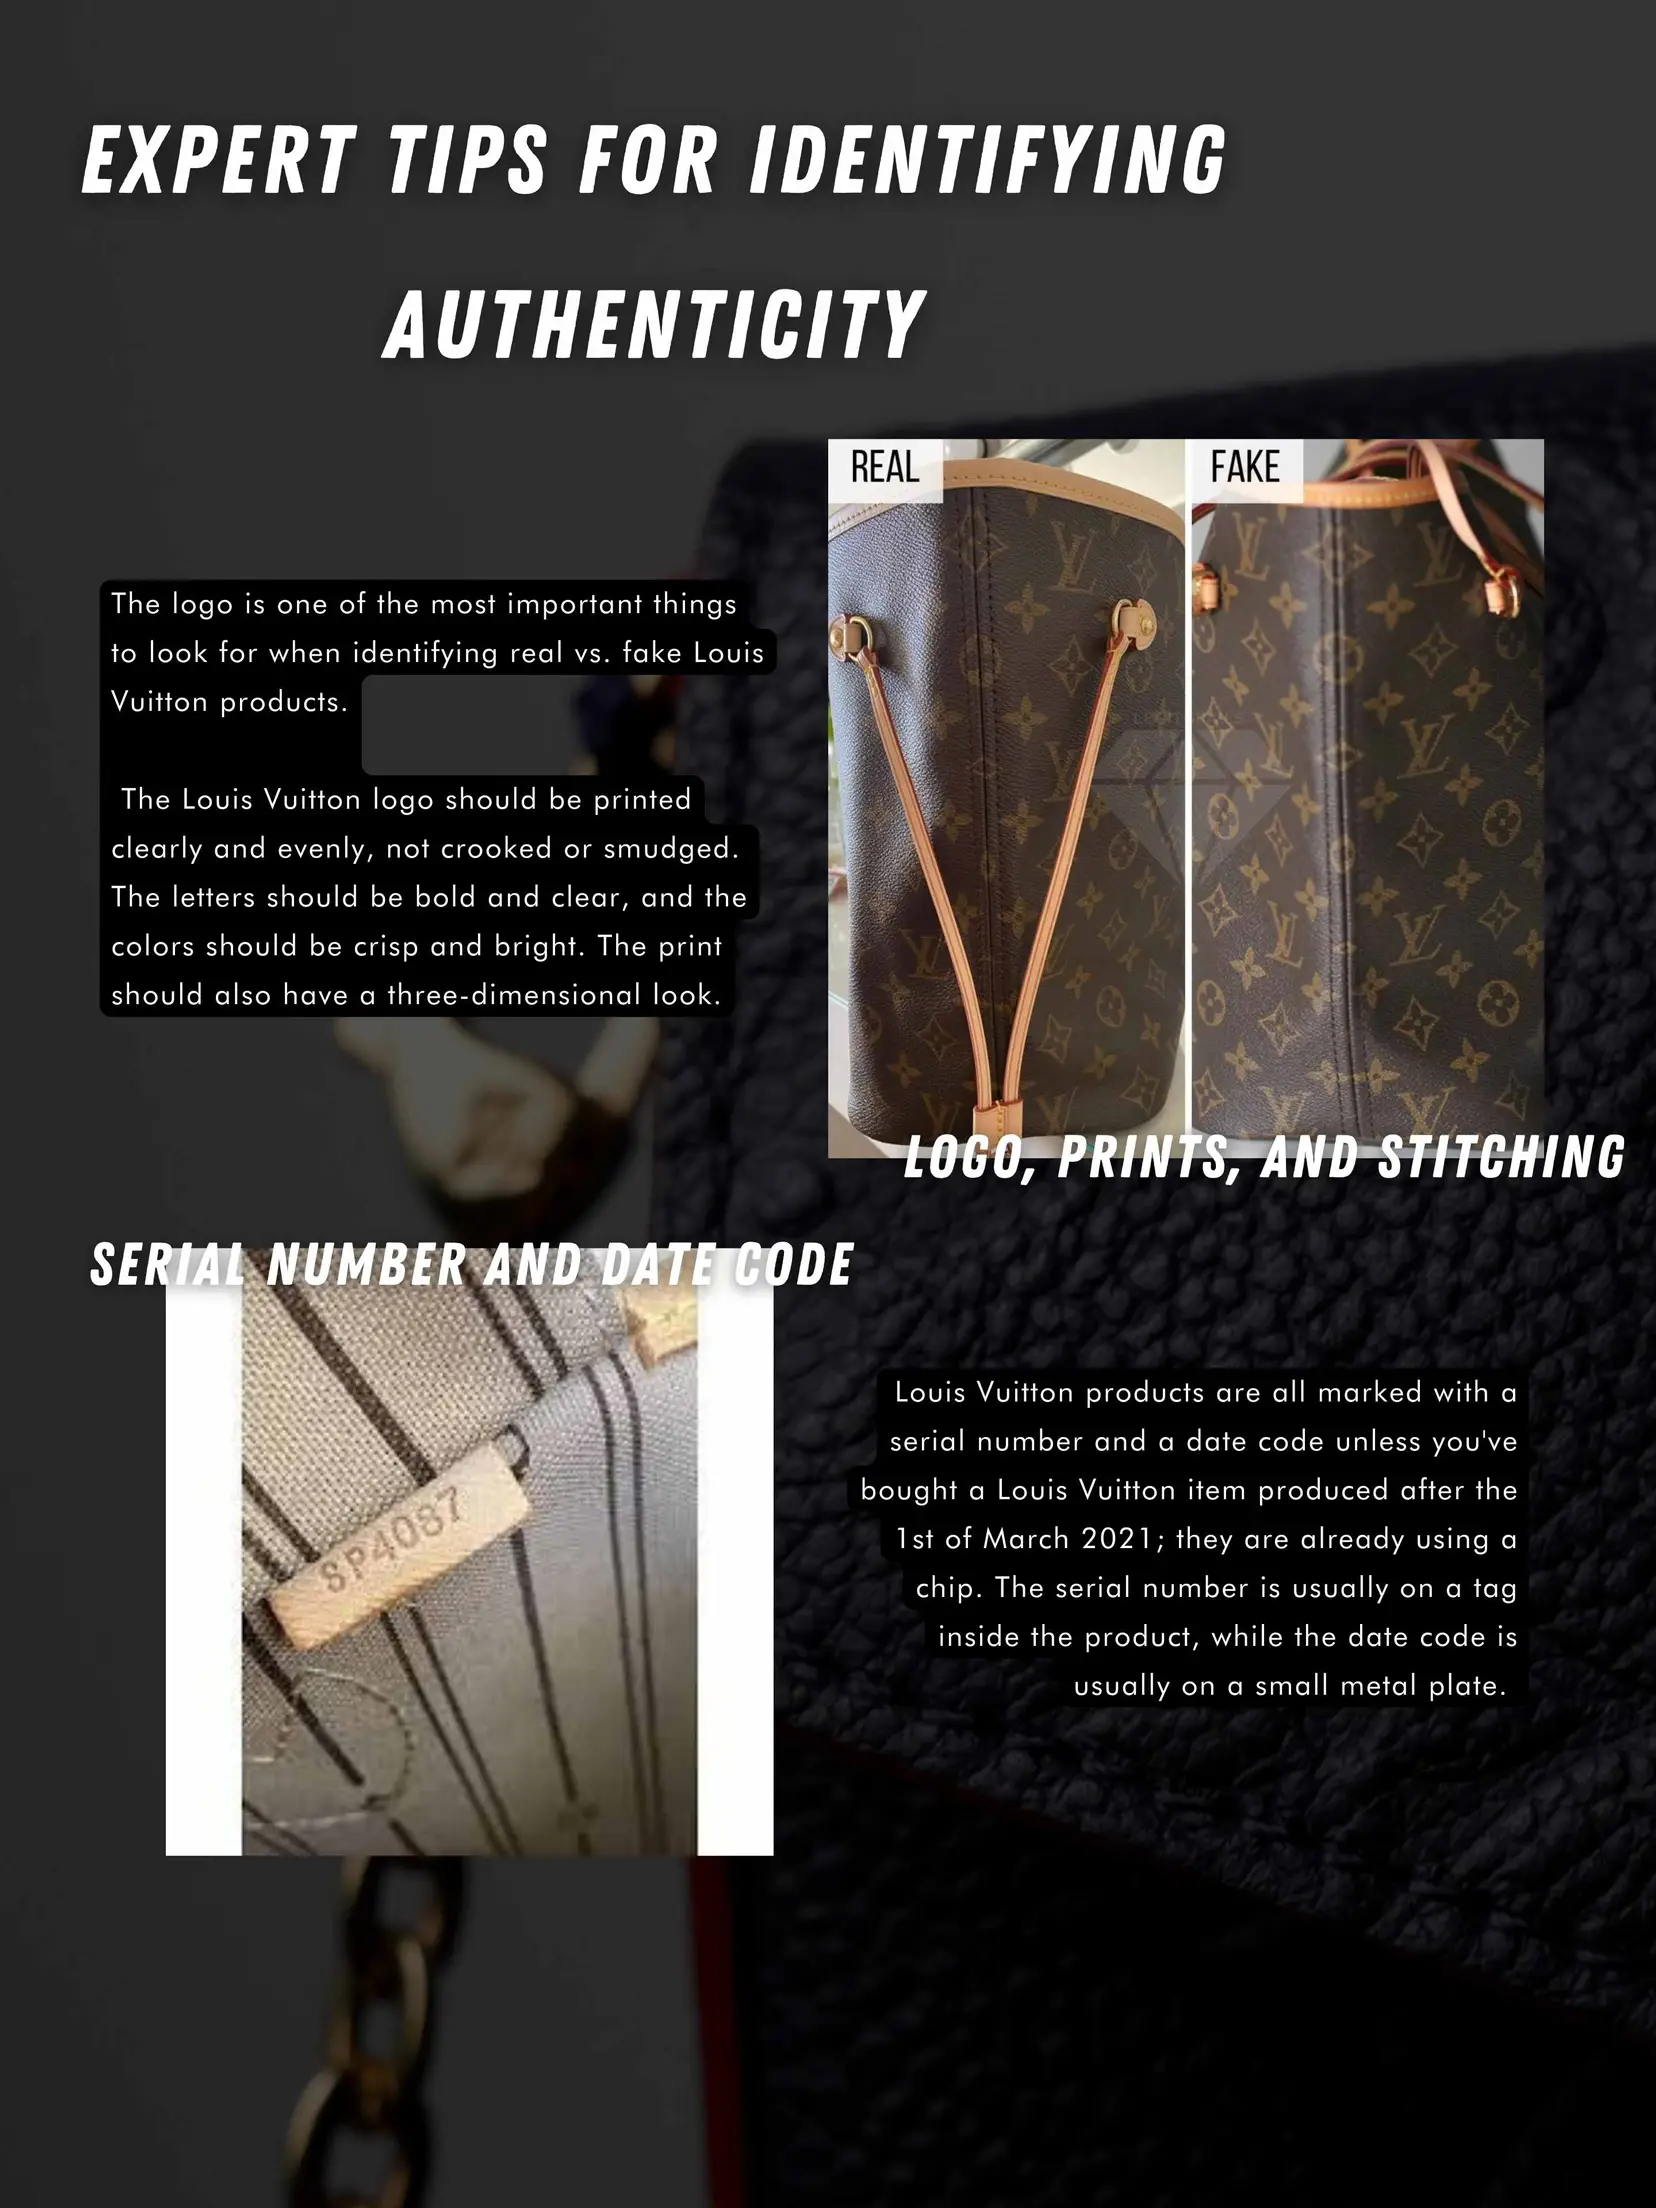 How to Quickly Identify Real vs. Fake LV